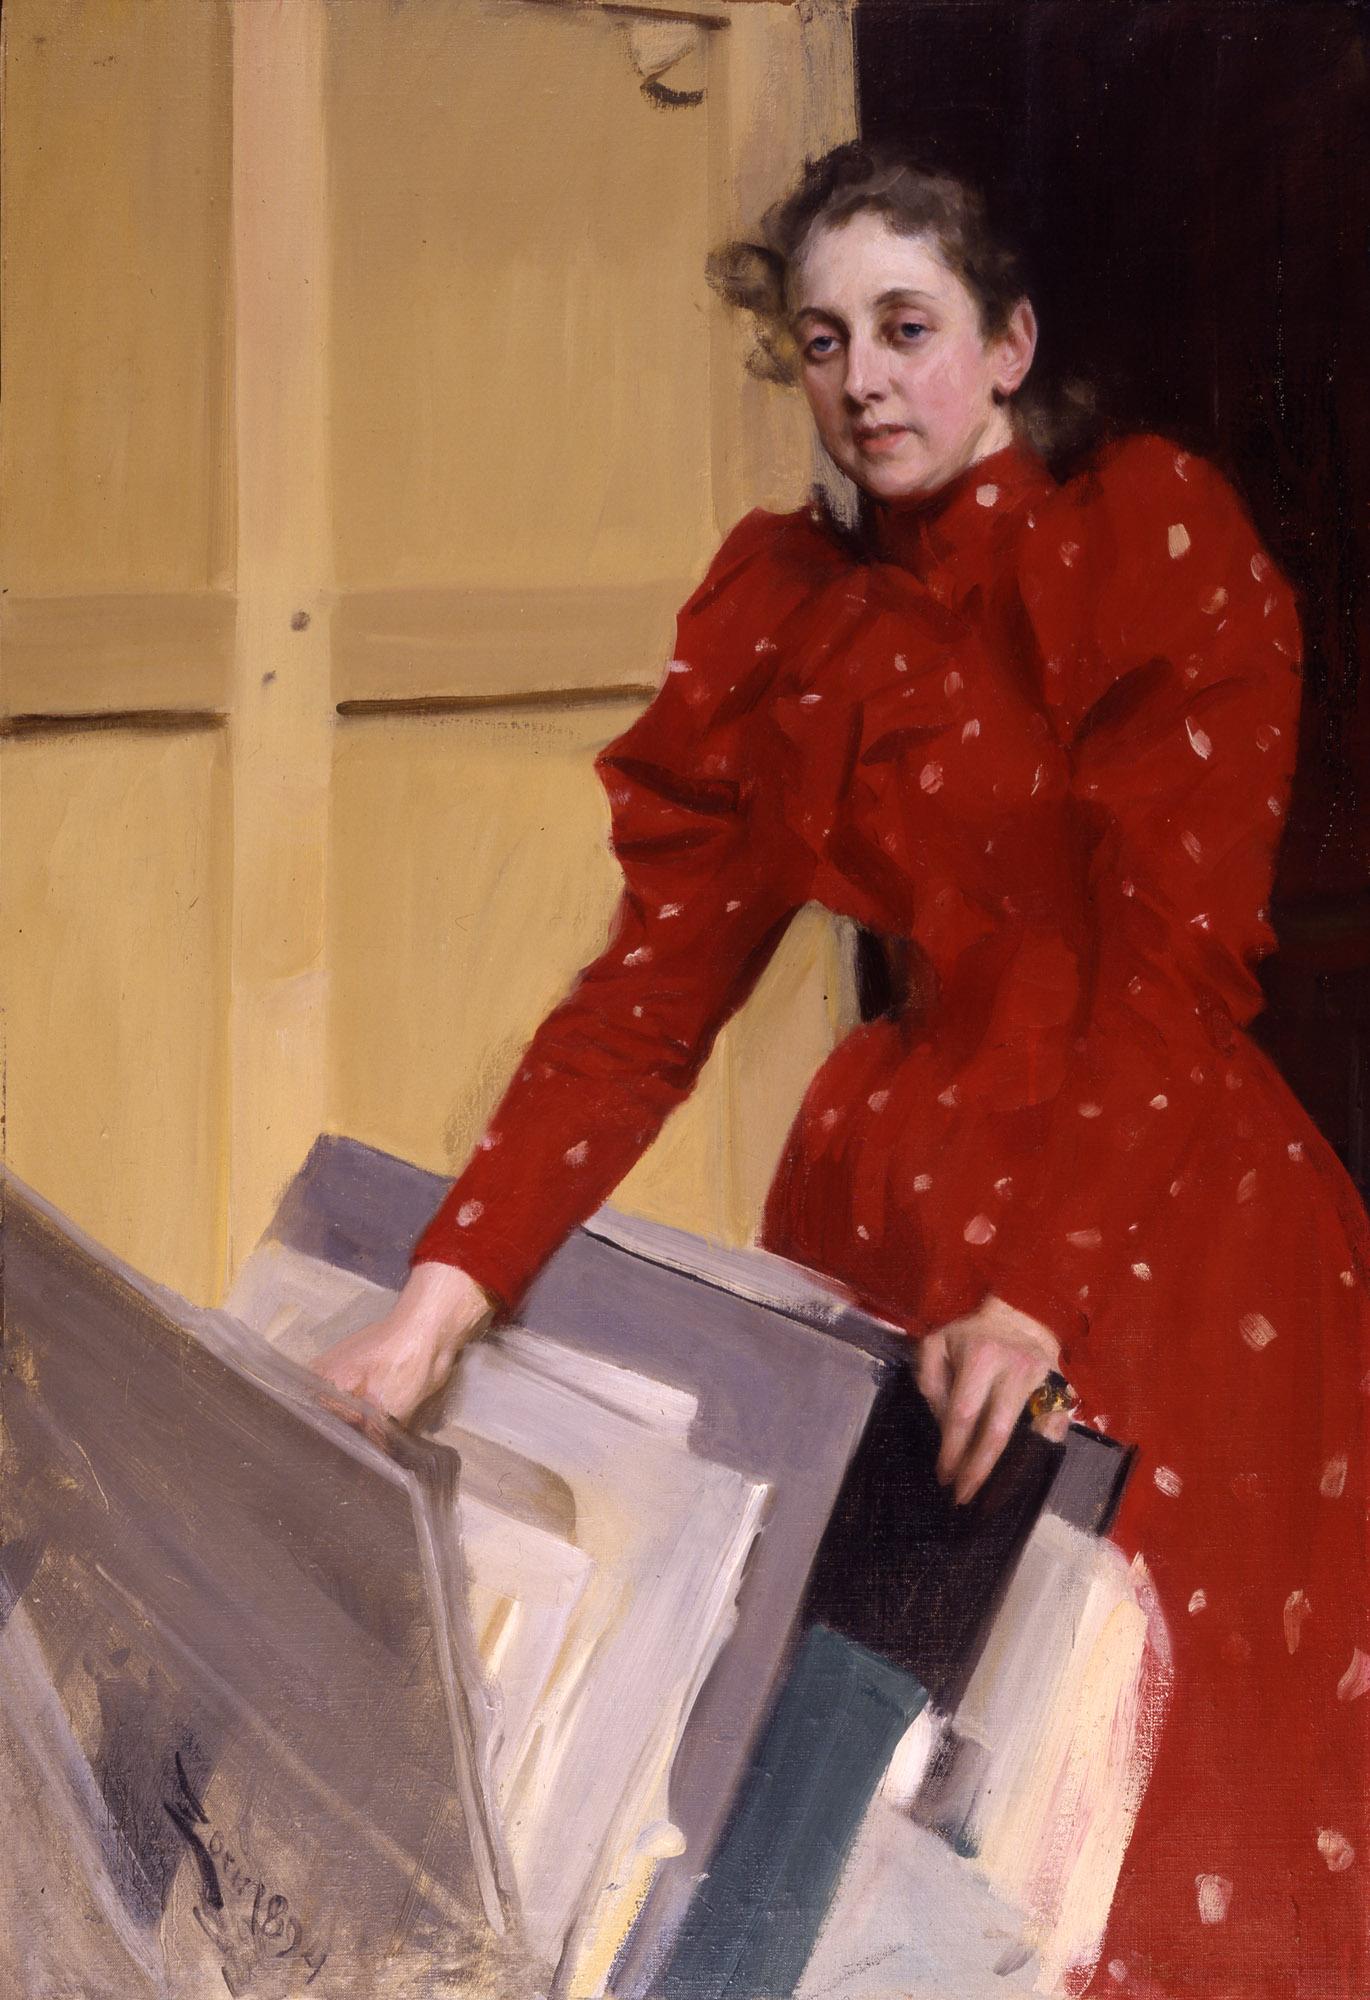 A portrait of Emma Zorn (oil on canvas), by Anders Zorn, is from 1894. – © Zorn Museum